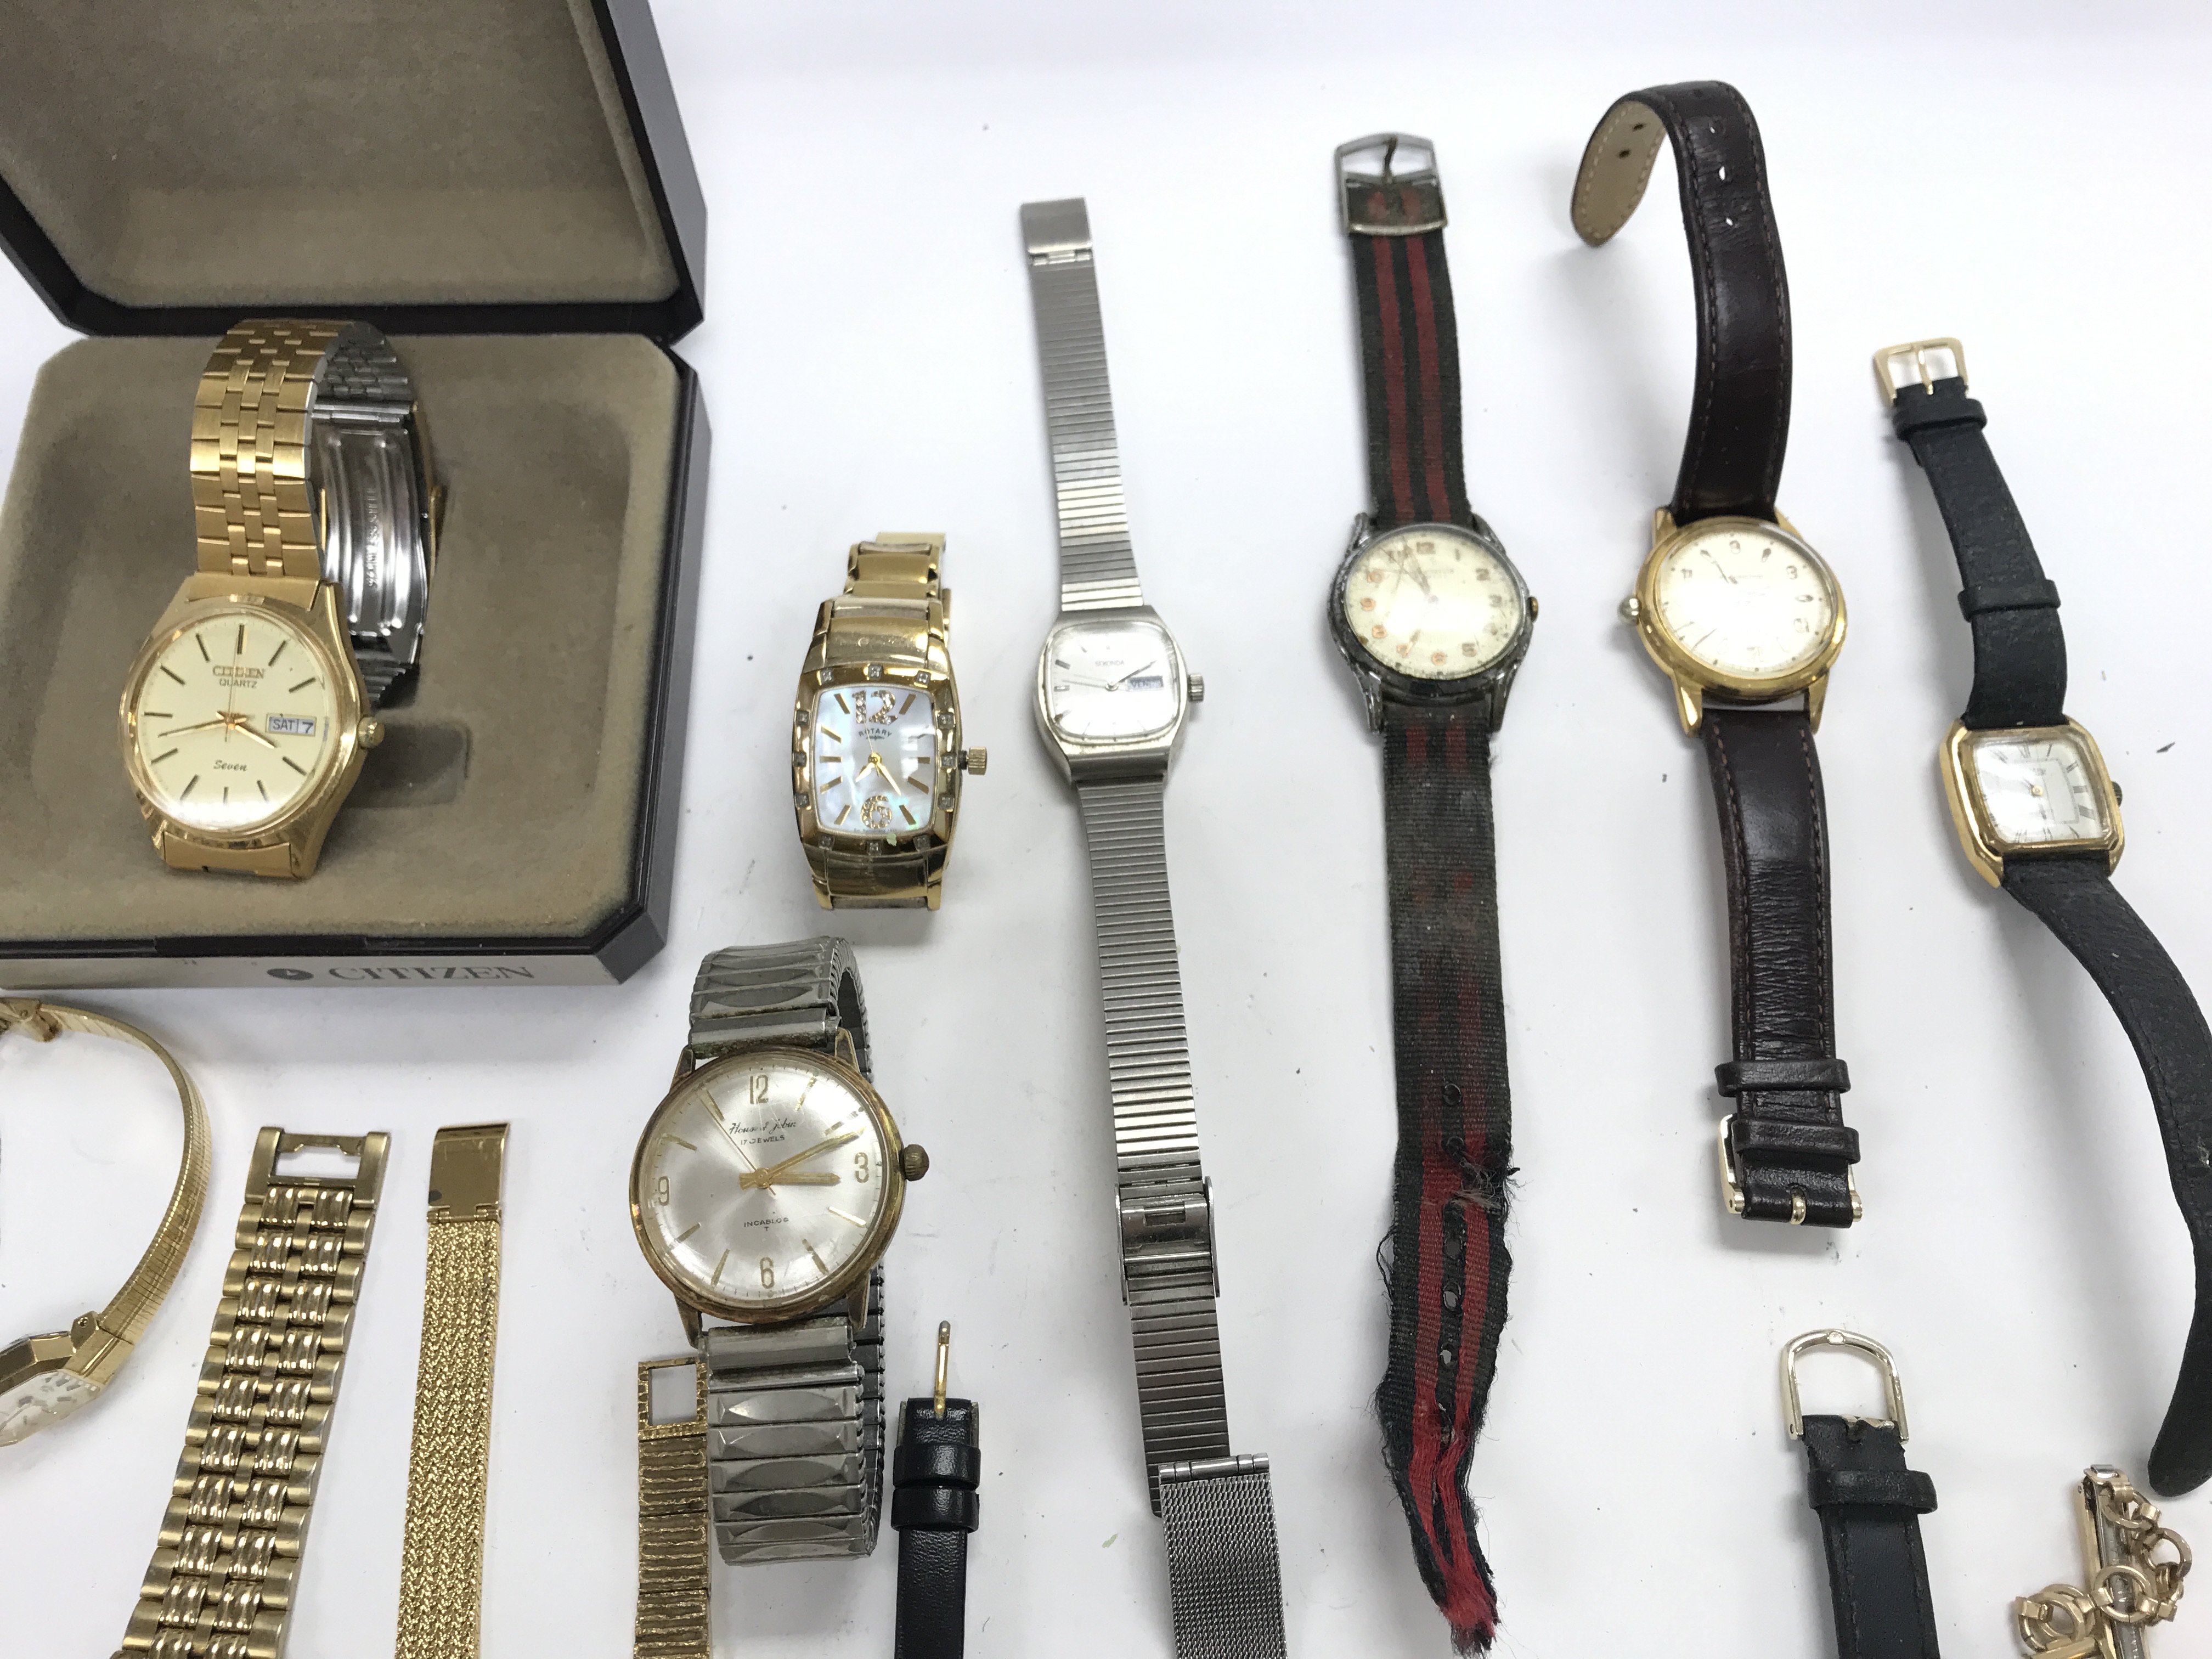 Collection of watches including Seiko - citizen - - Image 4 of 8